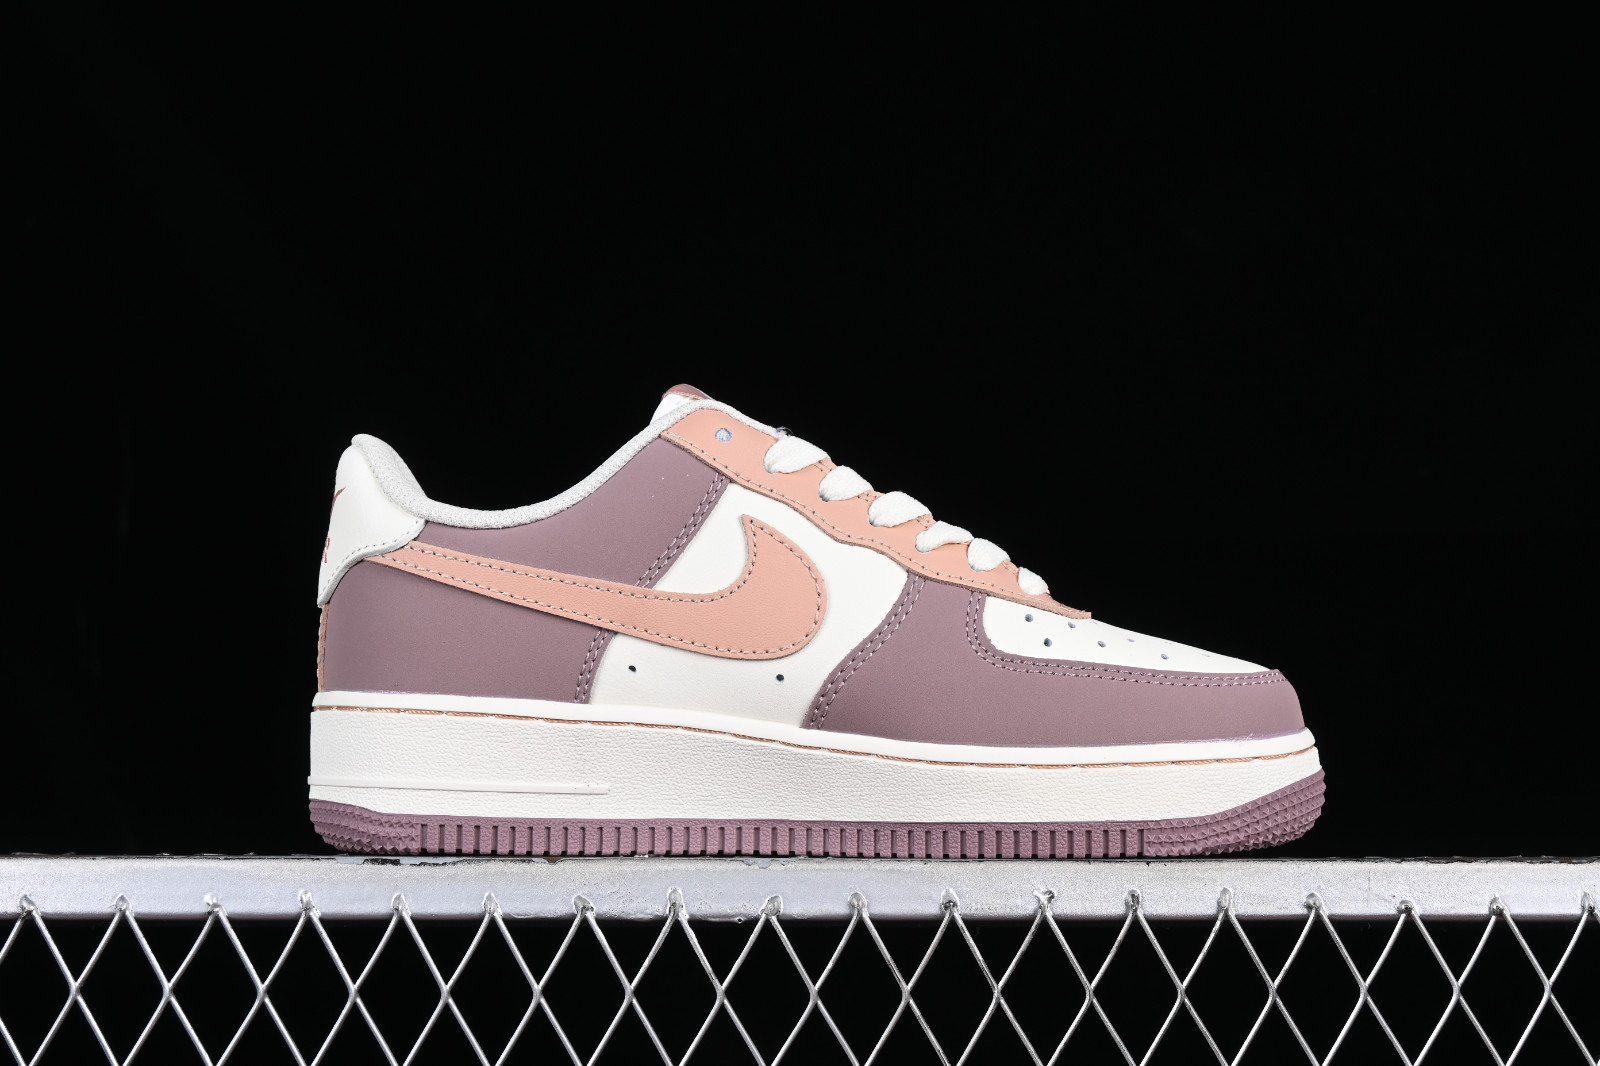 Kwelling ga sightseeing Overvloedig MultiscaleconsultingShops - Nike lake Air Force 1 07 Low White Purple Pink  DB3301 - nike air max classic bw men - 155